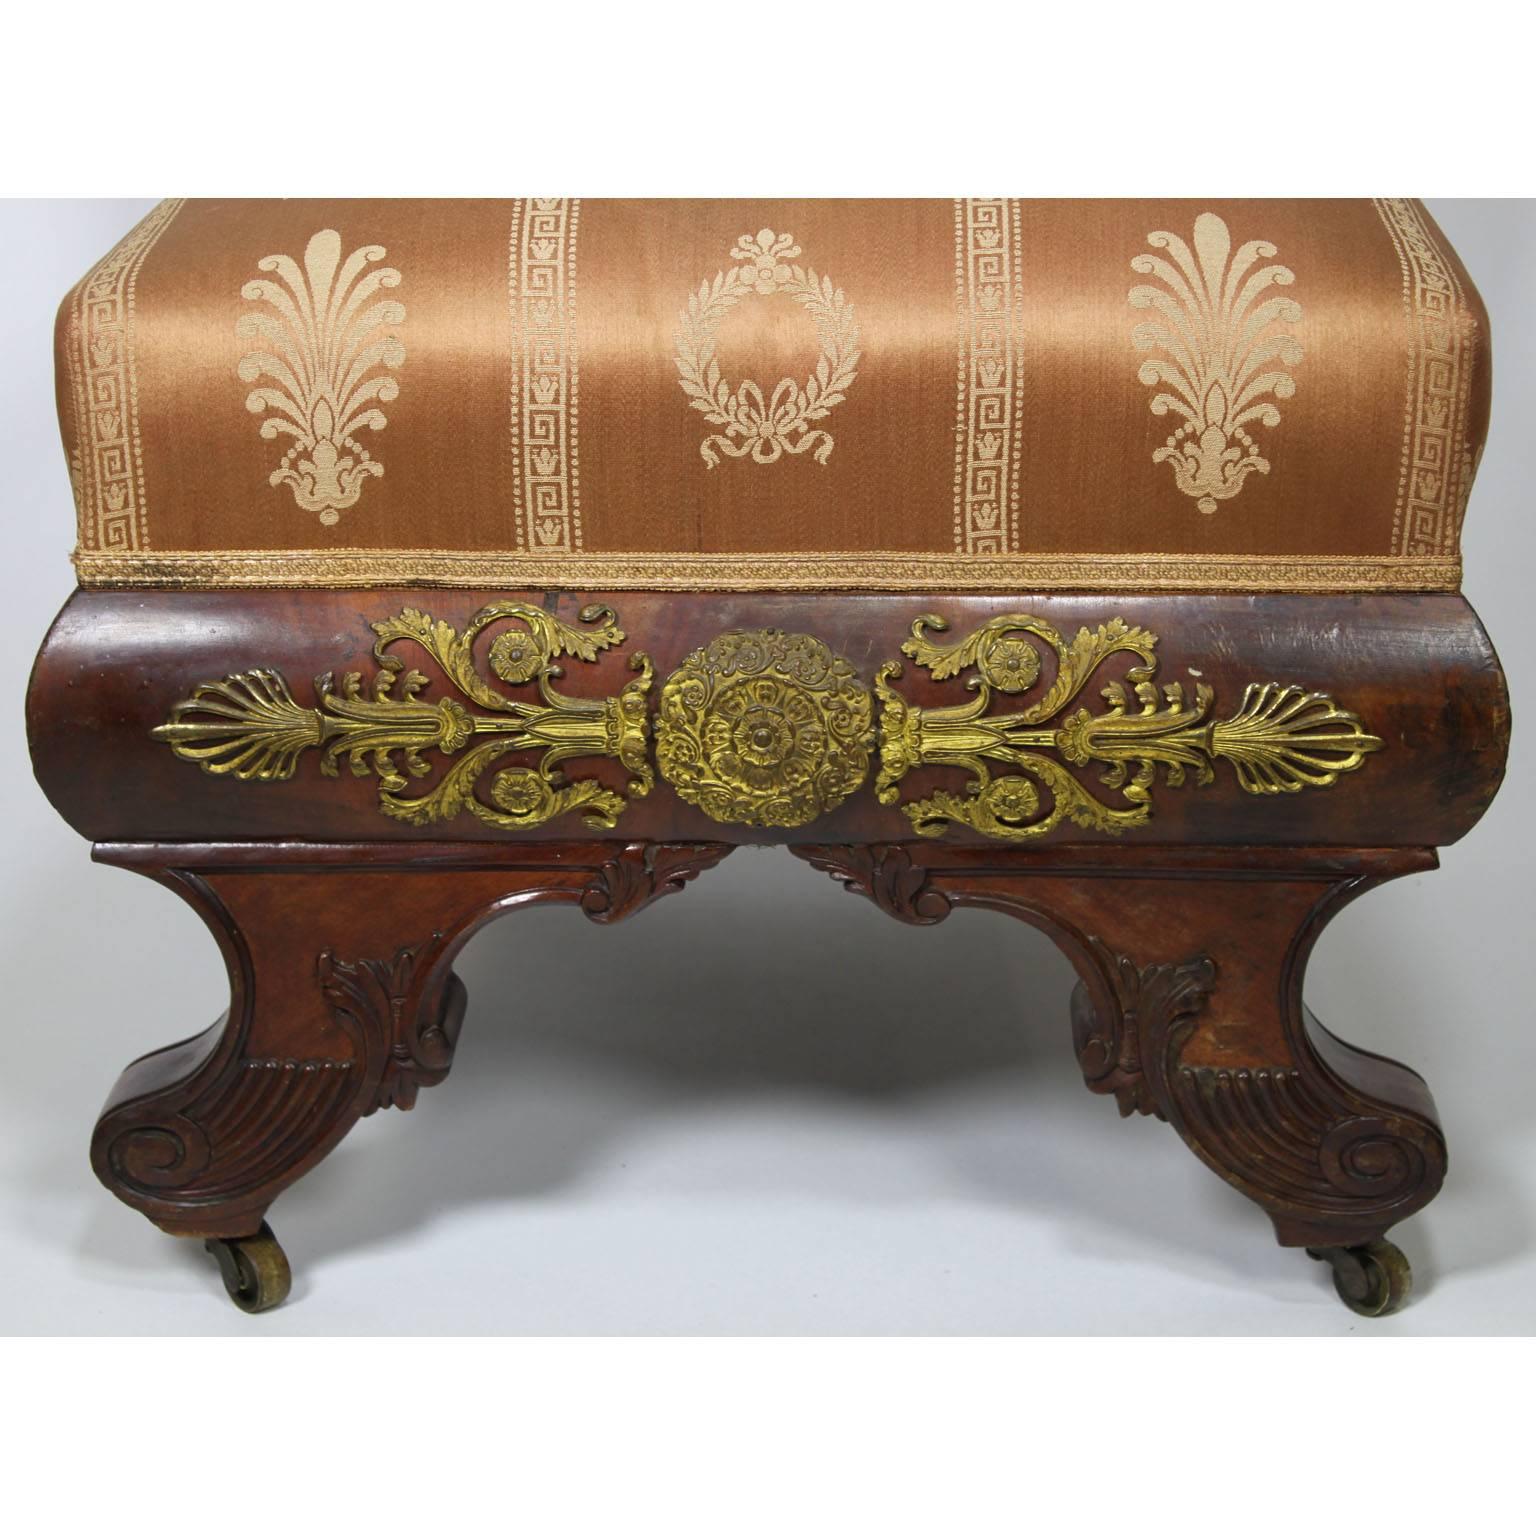 Carved French Napoleon III Empire Mahogany and Ormolu-Mounted Low Chair, after Thomire